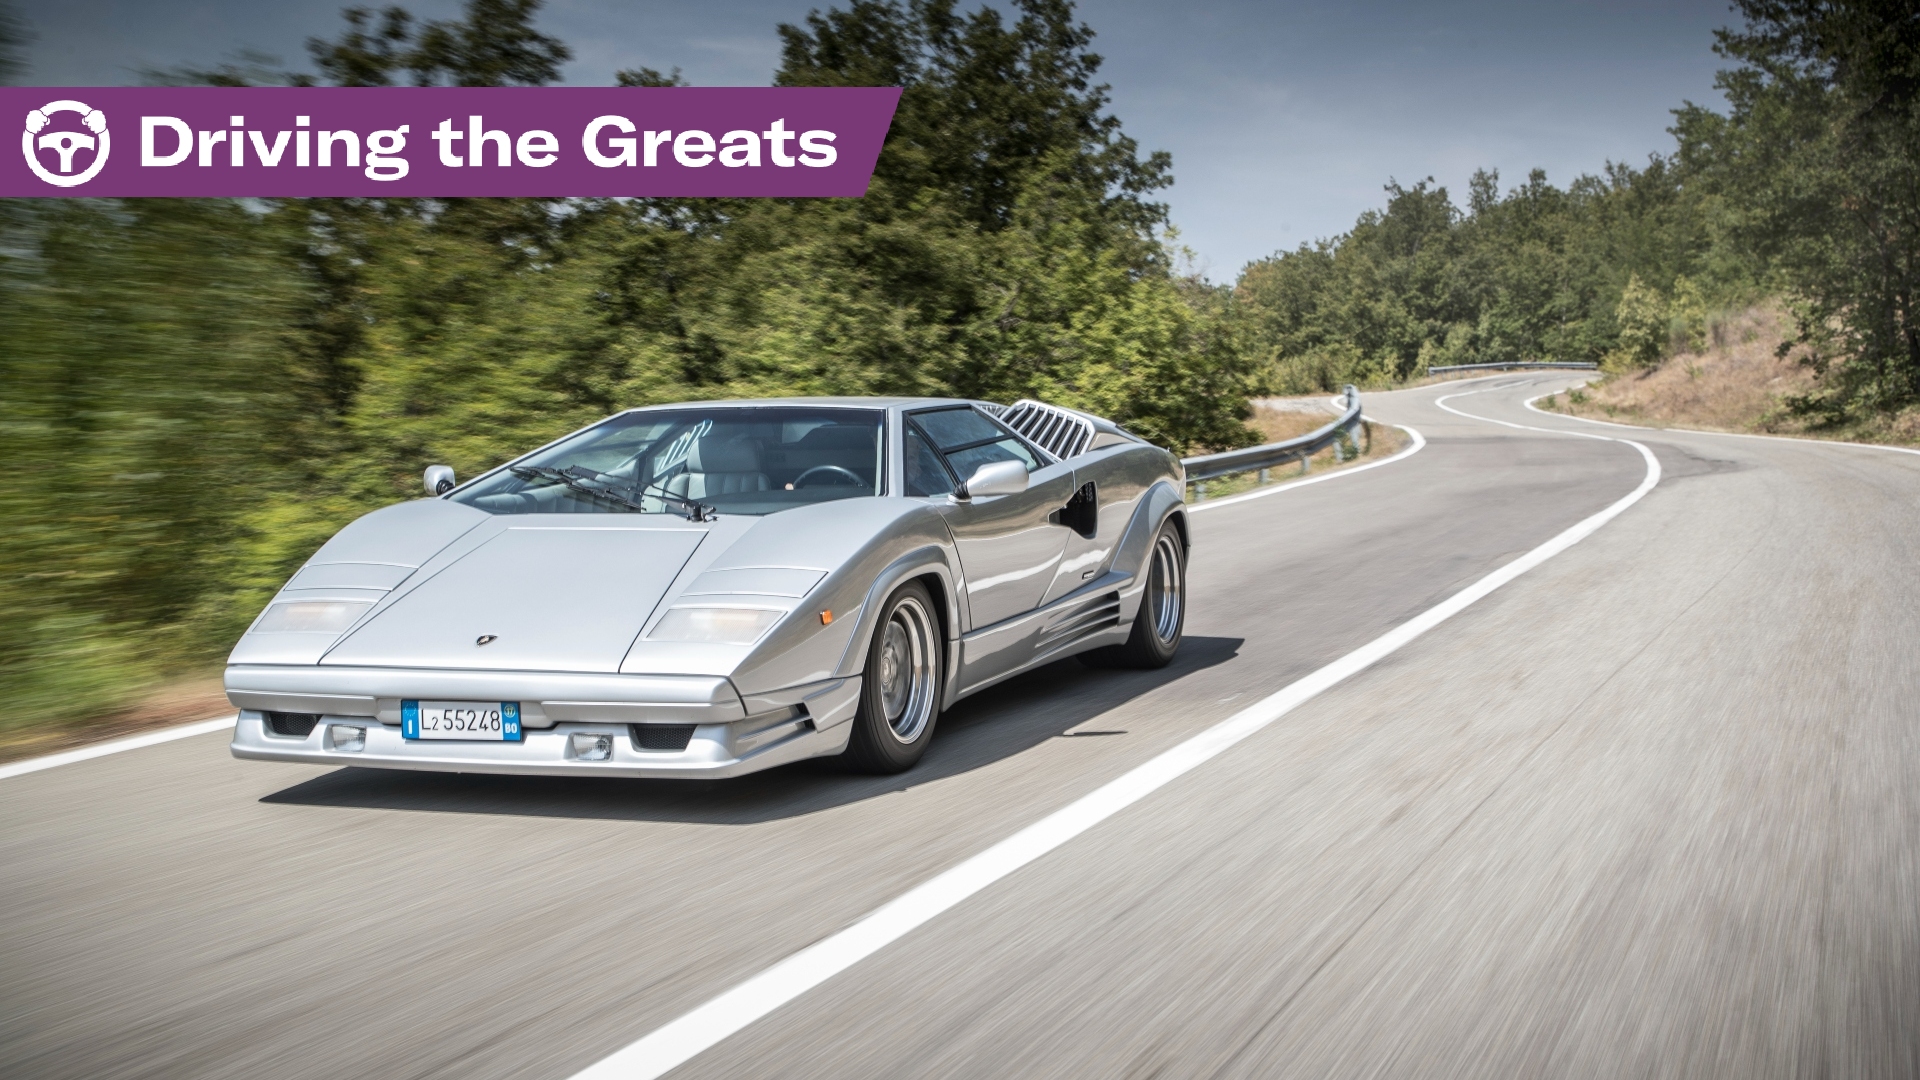 Driving the Greats: The Lamborghini Countach is terrifying and